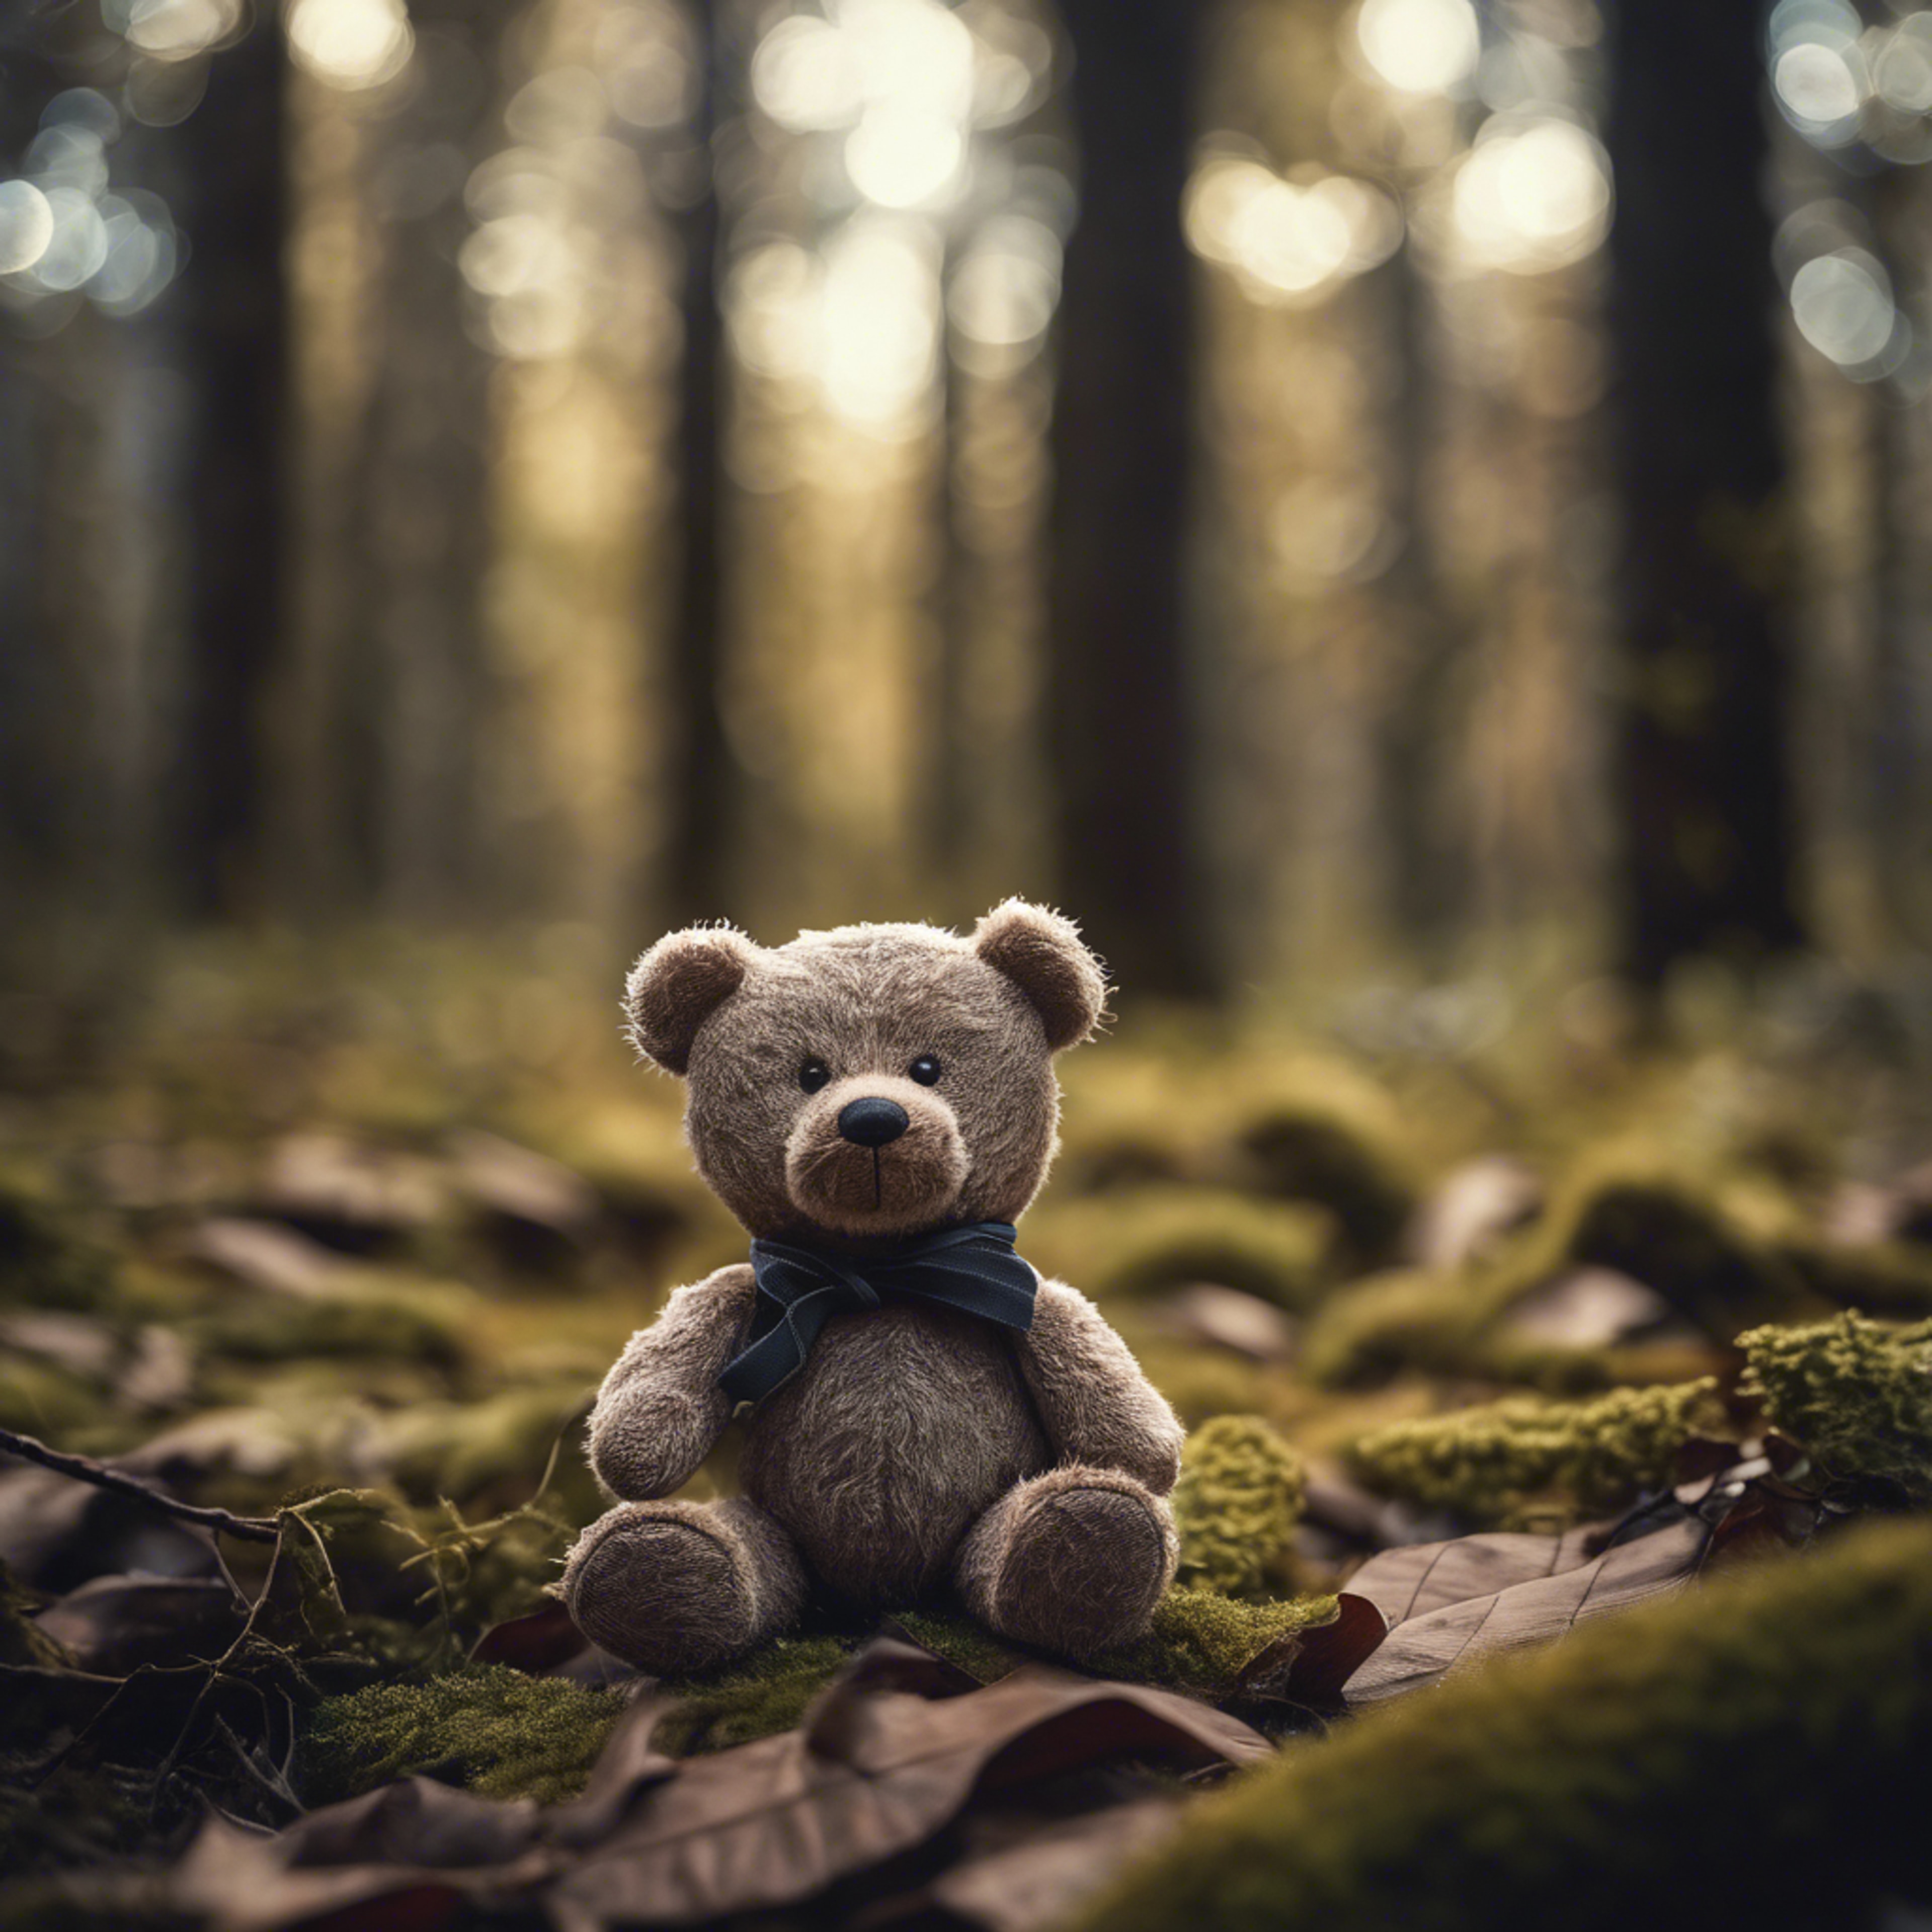 A teddy bear lost and alone in a dark forest. Тапет[4d225efade314682baea]